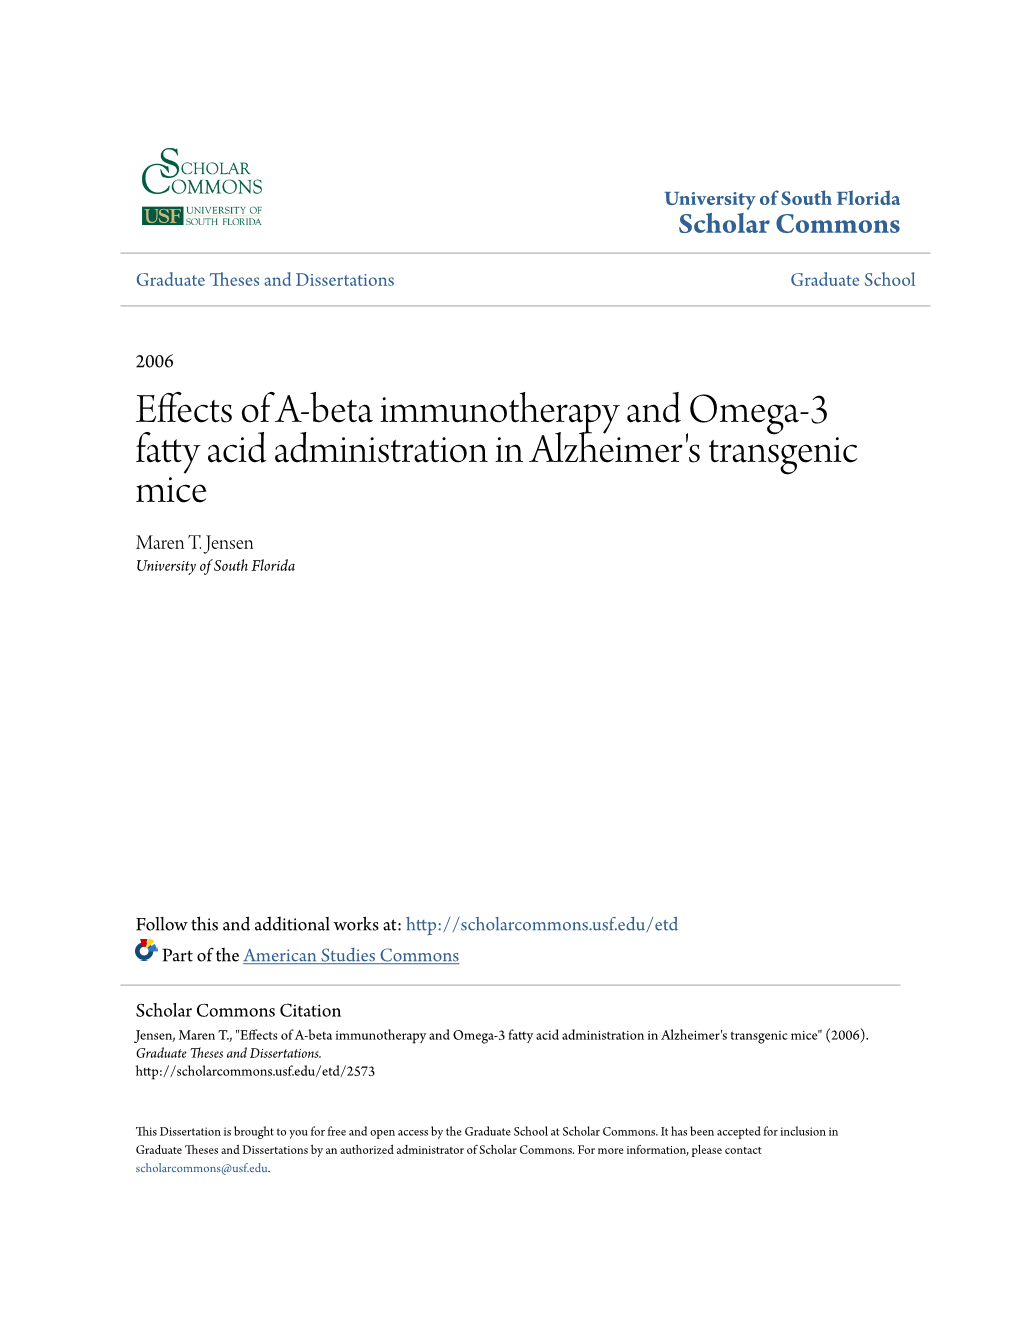 Effects of A-Beta Immunotherapy and Omega-3 Fatty Acid Administration in Alzheimer's Transgenic Mice Maren T